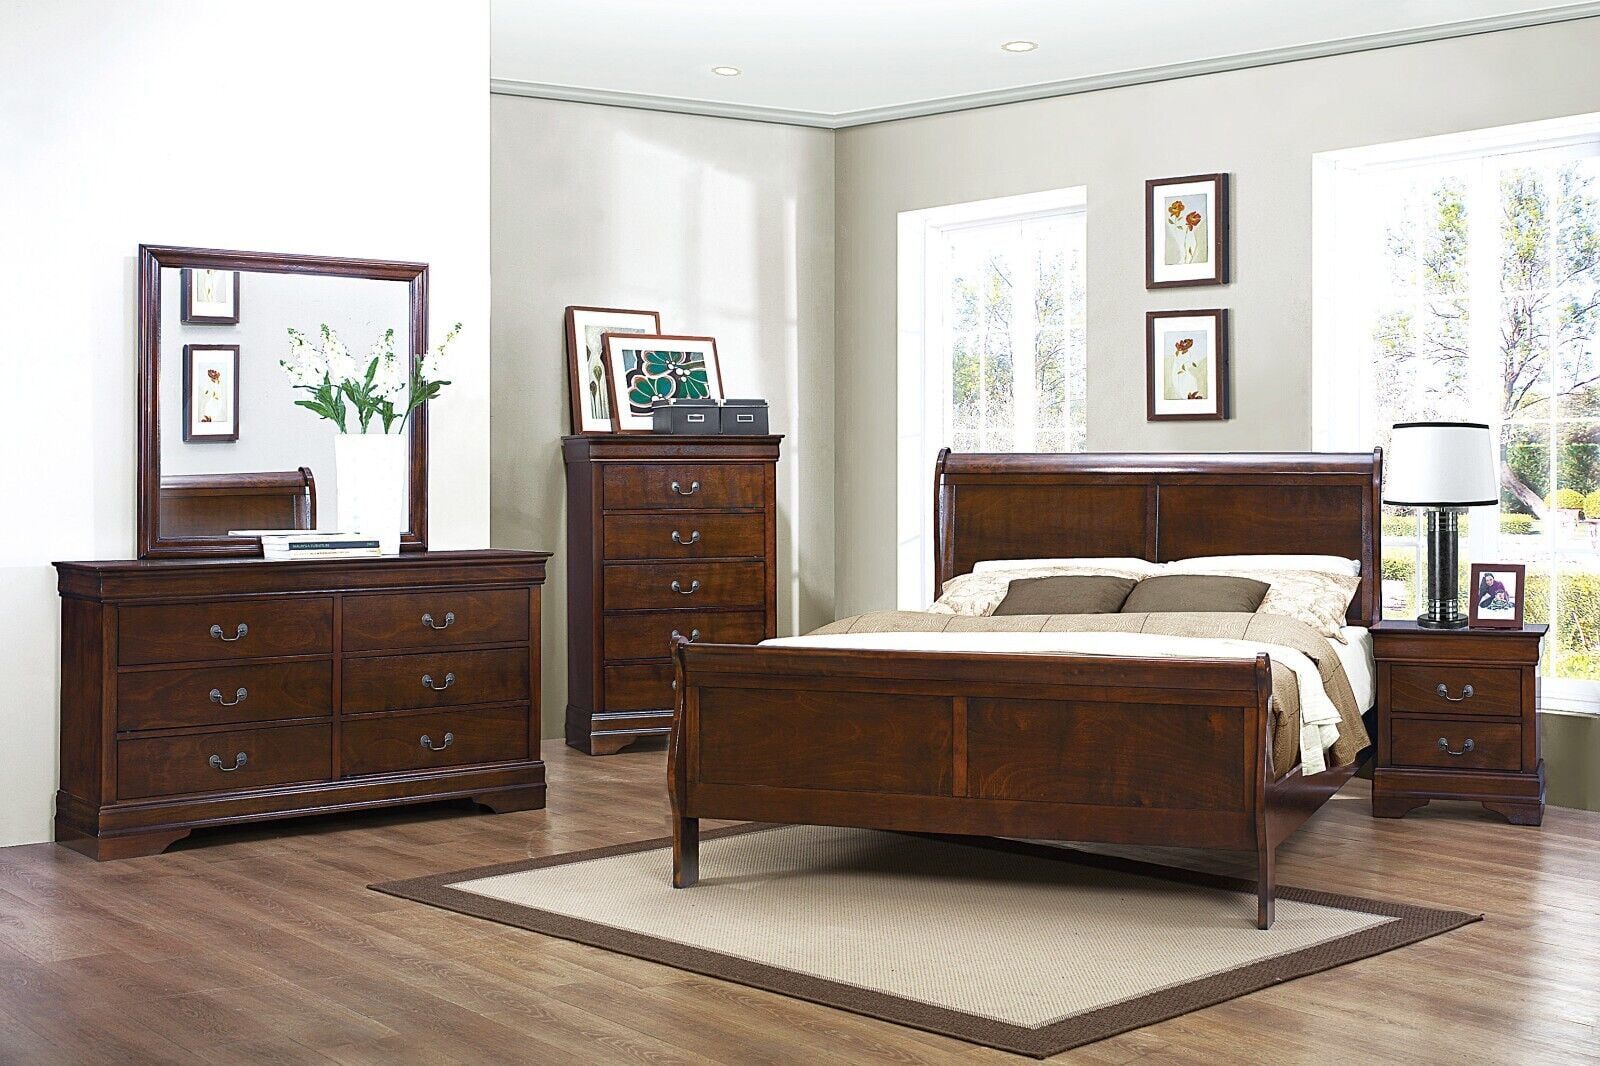 Louis Phillipe Bedroom Set 5Pc in Black by Lifestyle w/Options